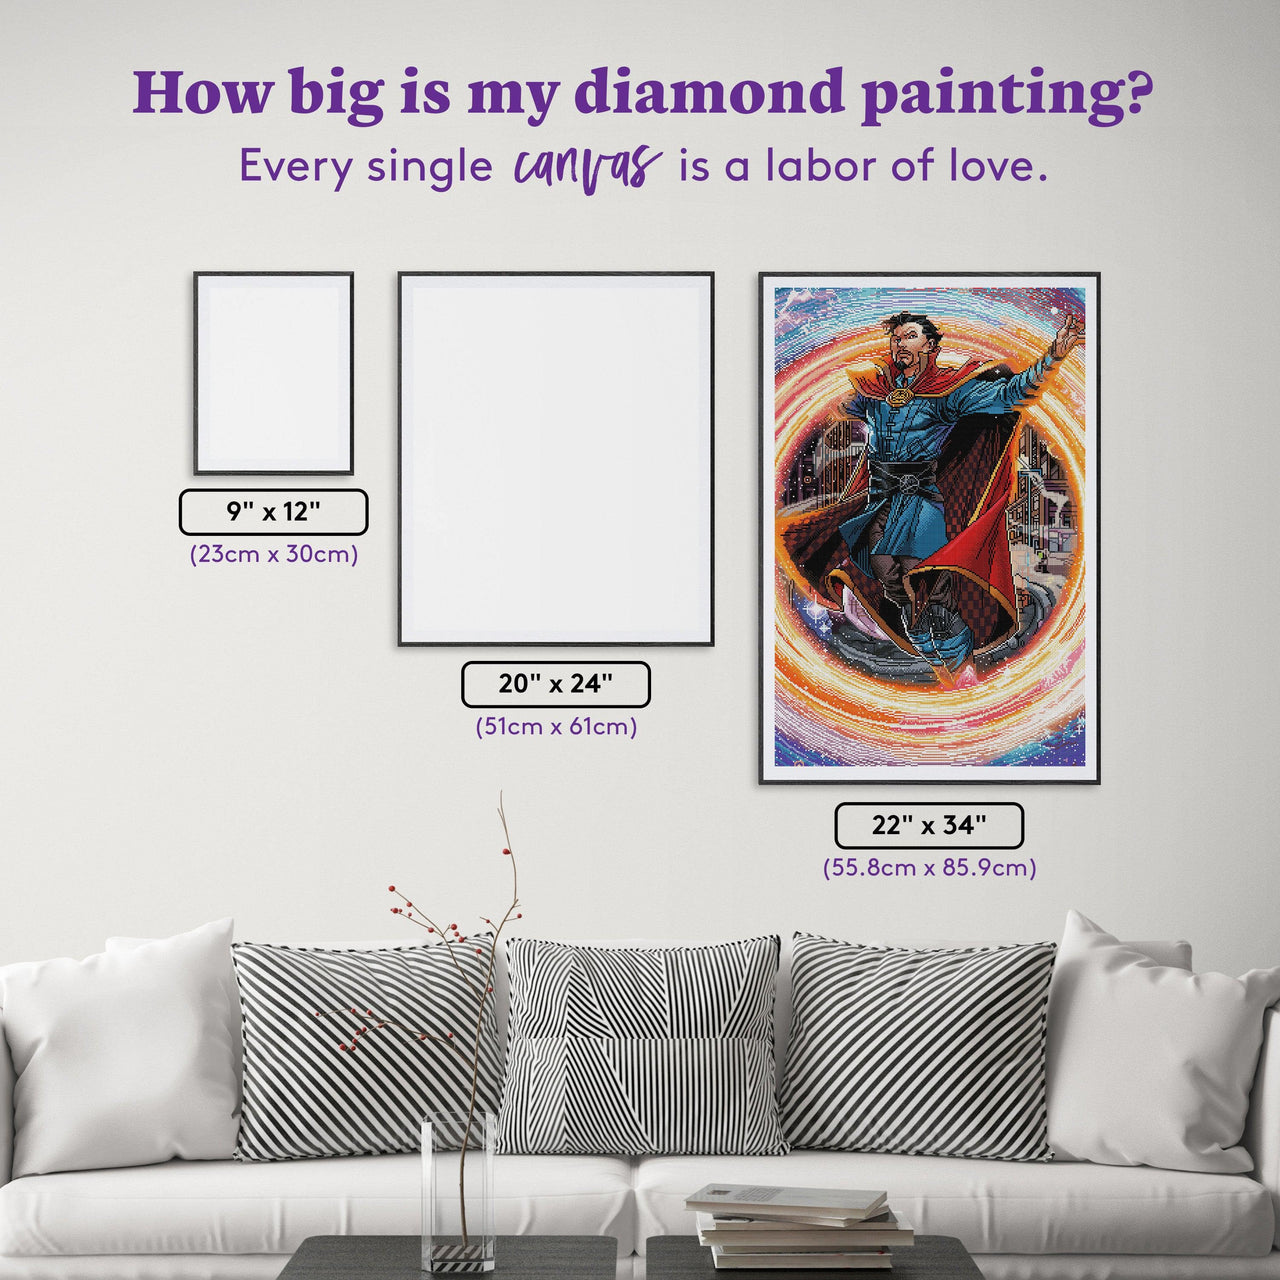 Diamond Painting Magic Portal 22" x 34" (55.8cm x 85.9cm) / Square with 61 Colors including 3 ABs and 1 Fairy Dust Diamonds / 77,280